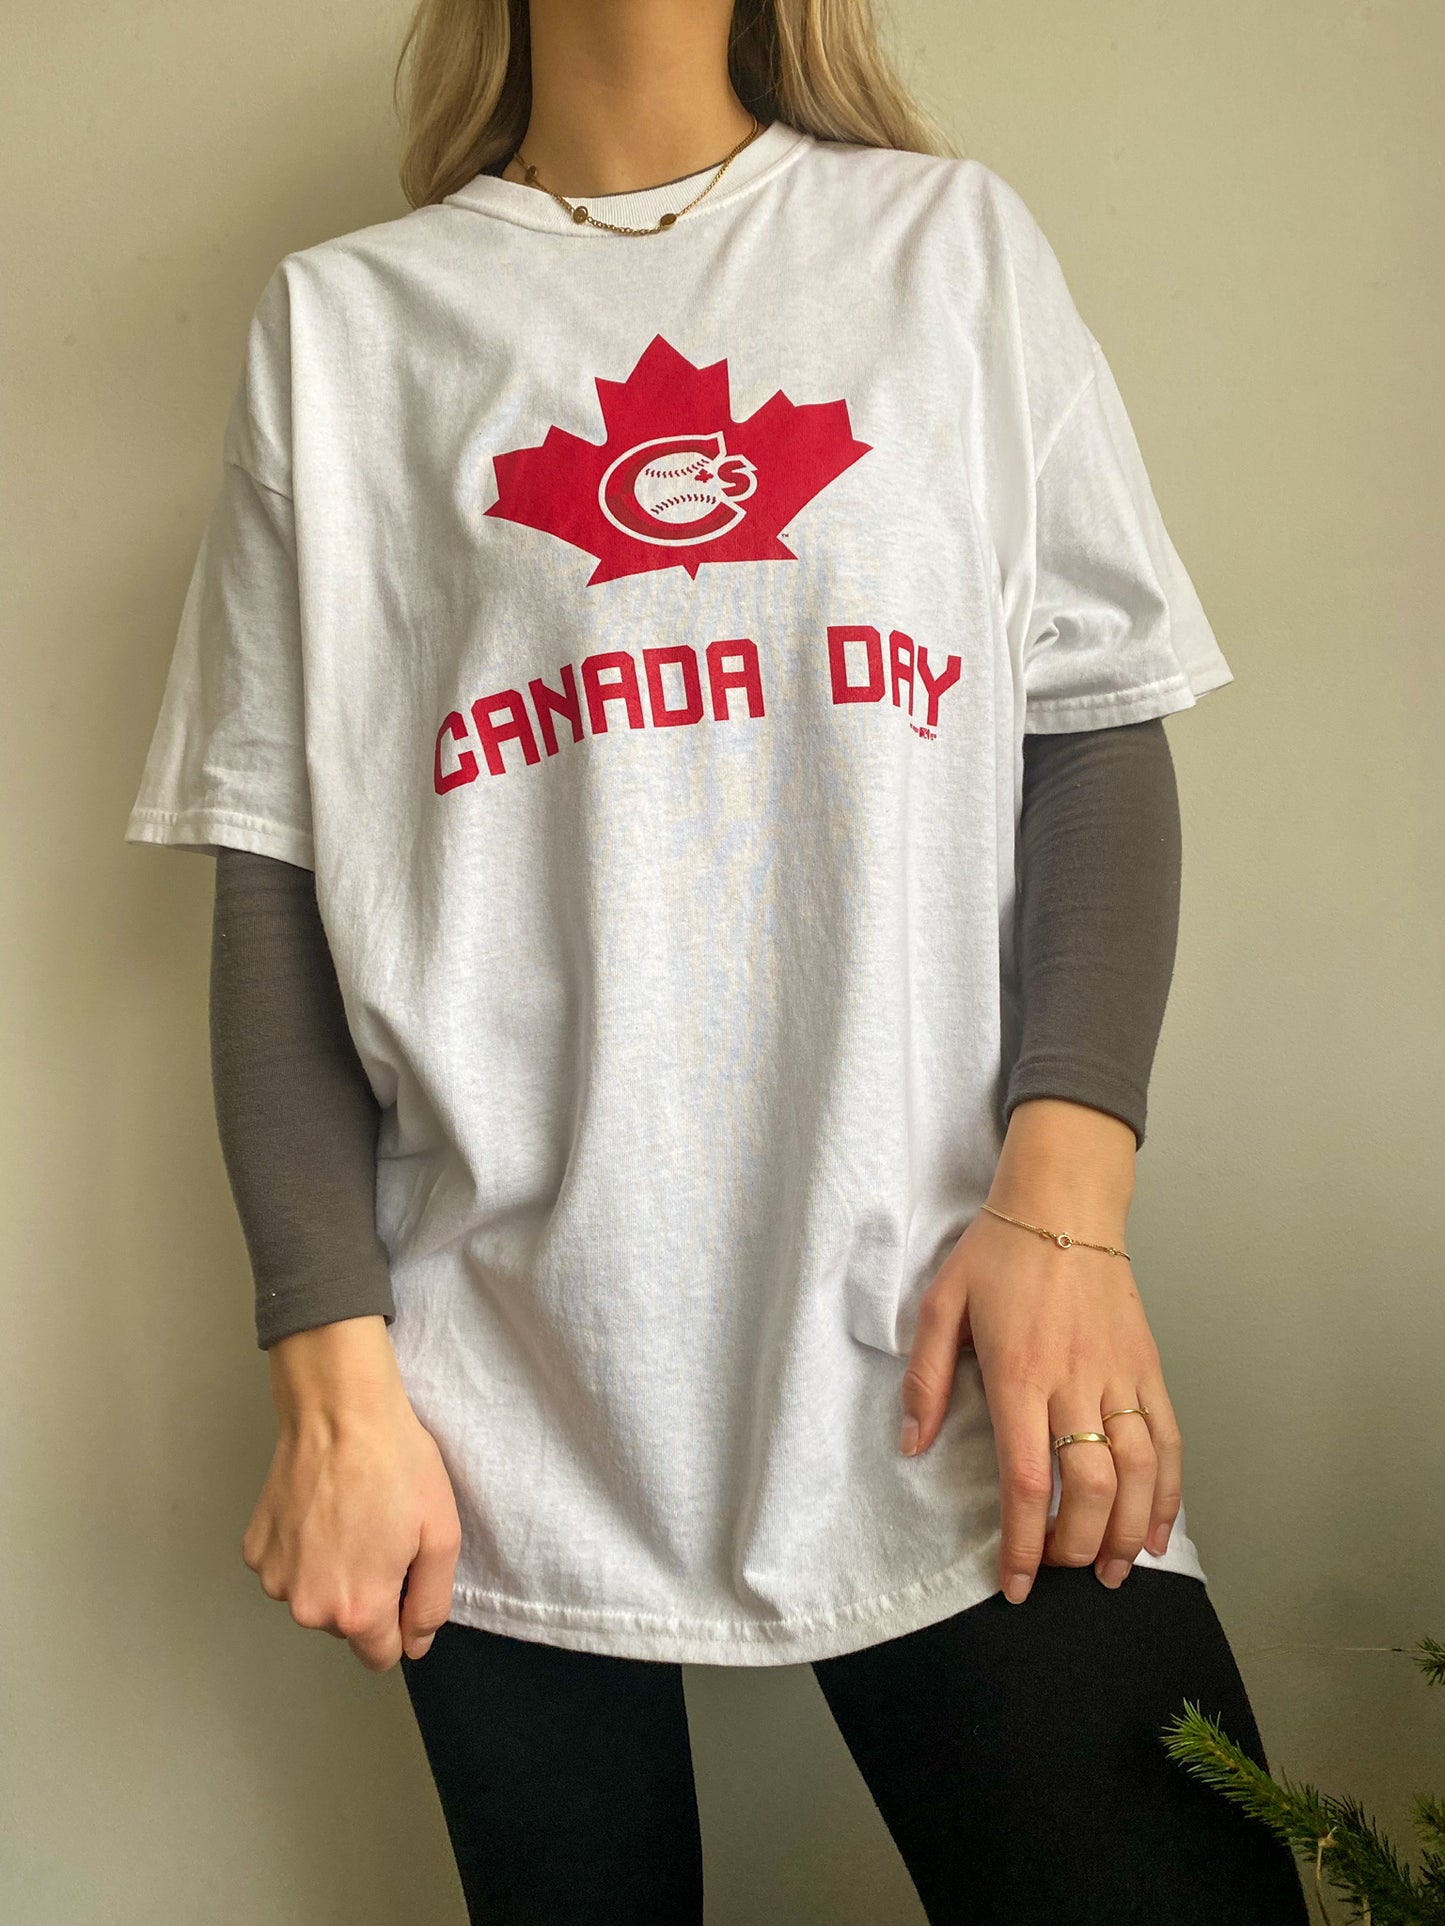 CANADA DAY T-SHIRT